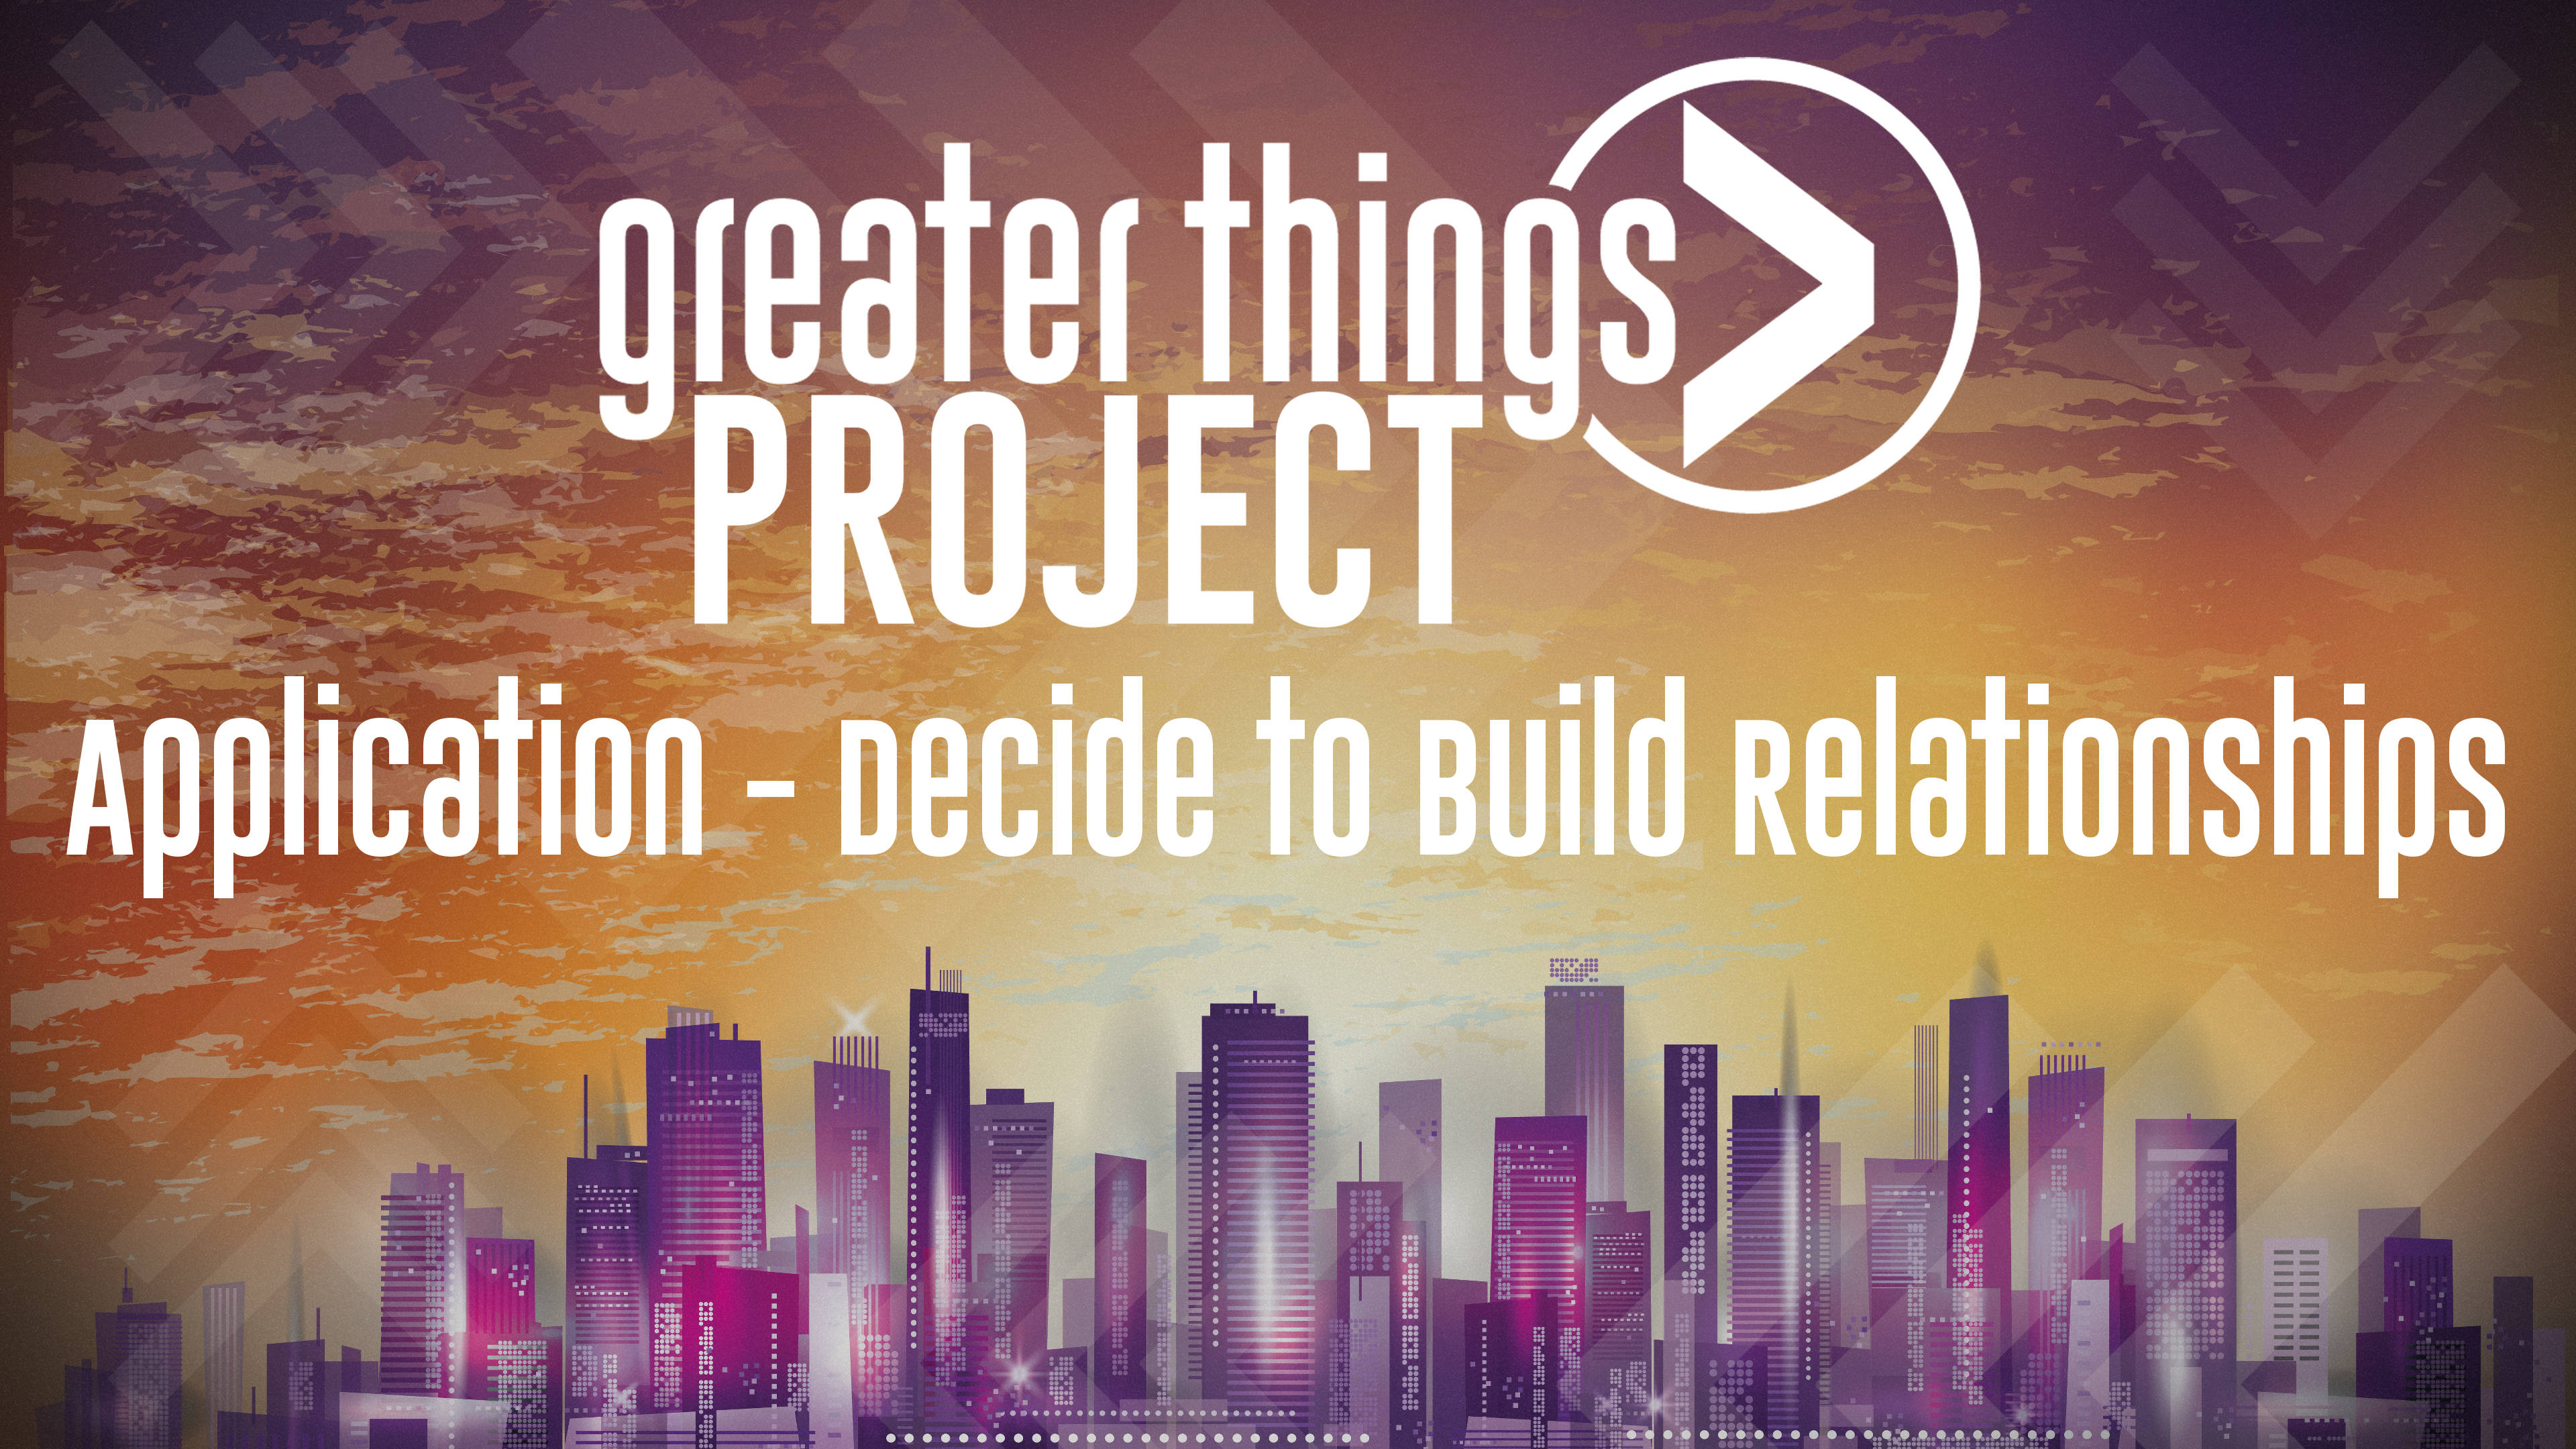 Greater Things Project | Application - Decide to Build Relationships